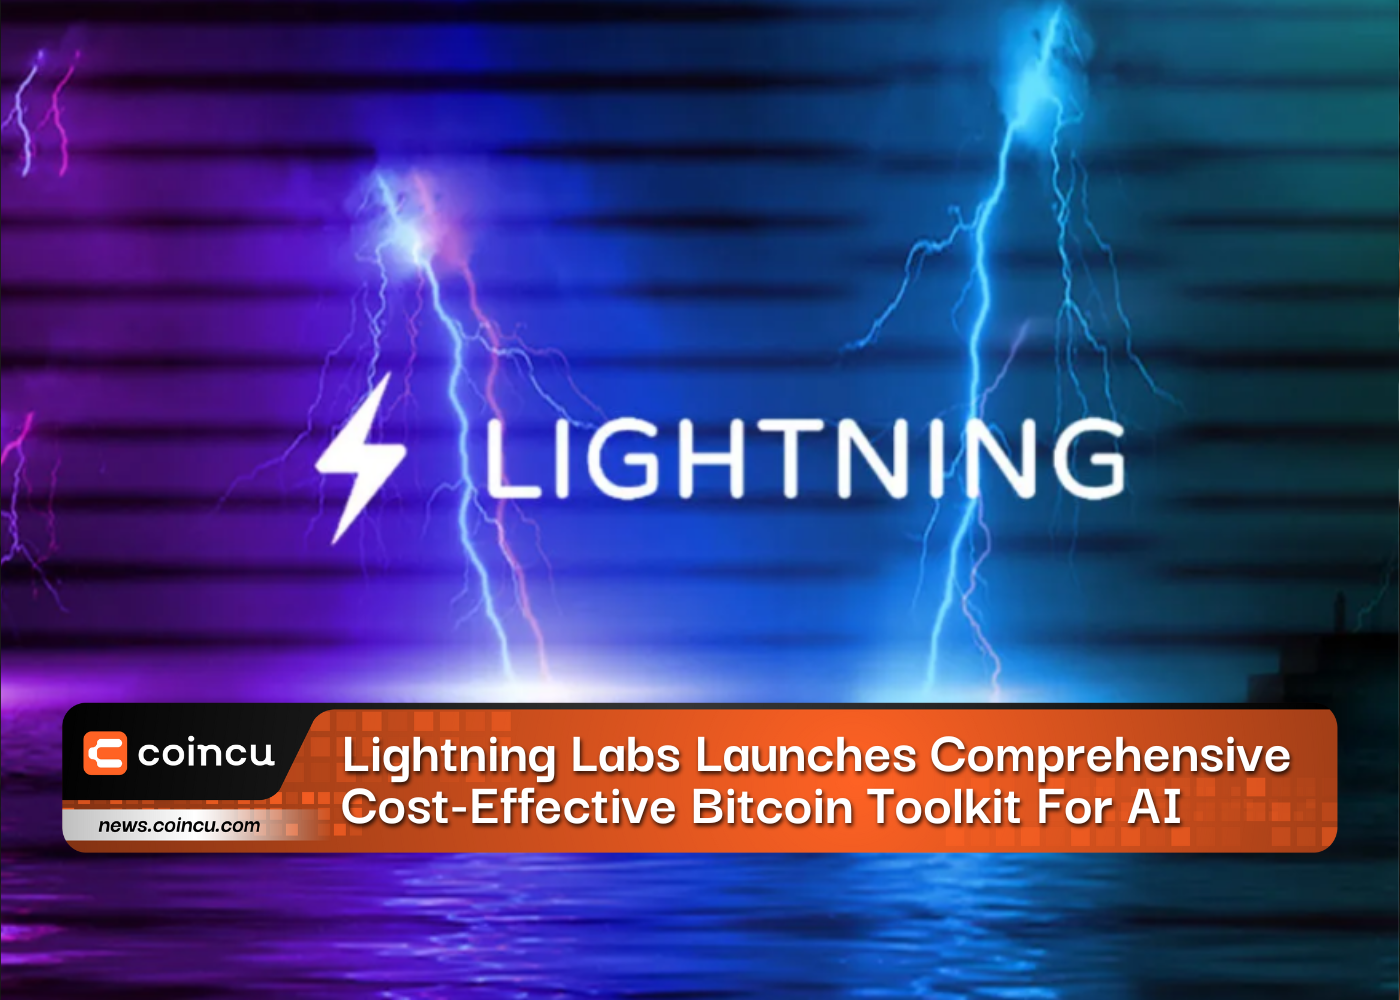 Lightning Labs Launches New Comprehensive, Cost-Effective Bitcoin Toolkit For AI